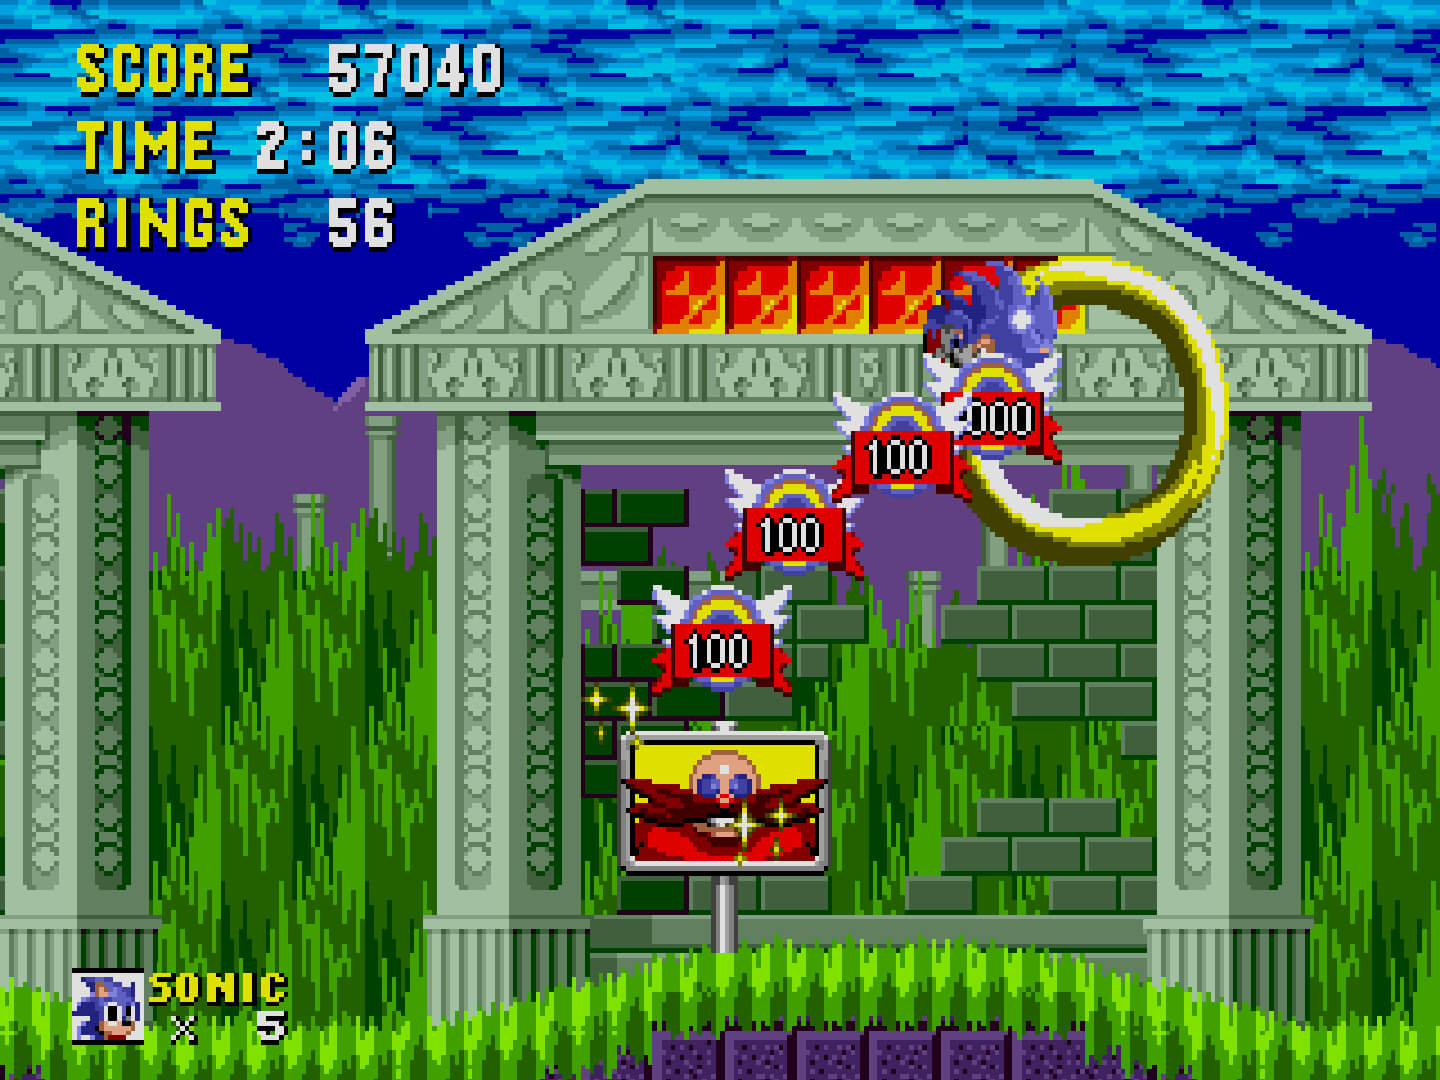 Sonic the Hedgehog 1: Green Hill Zone, Act 2 — Not Enough Rings